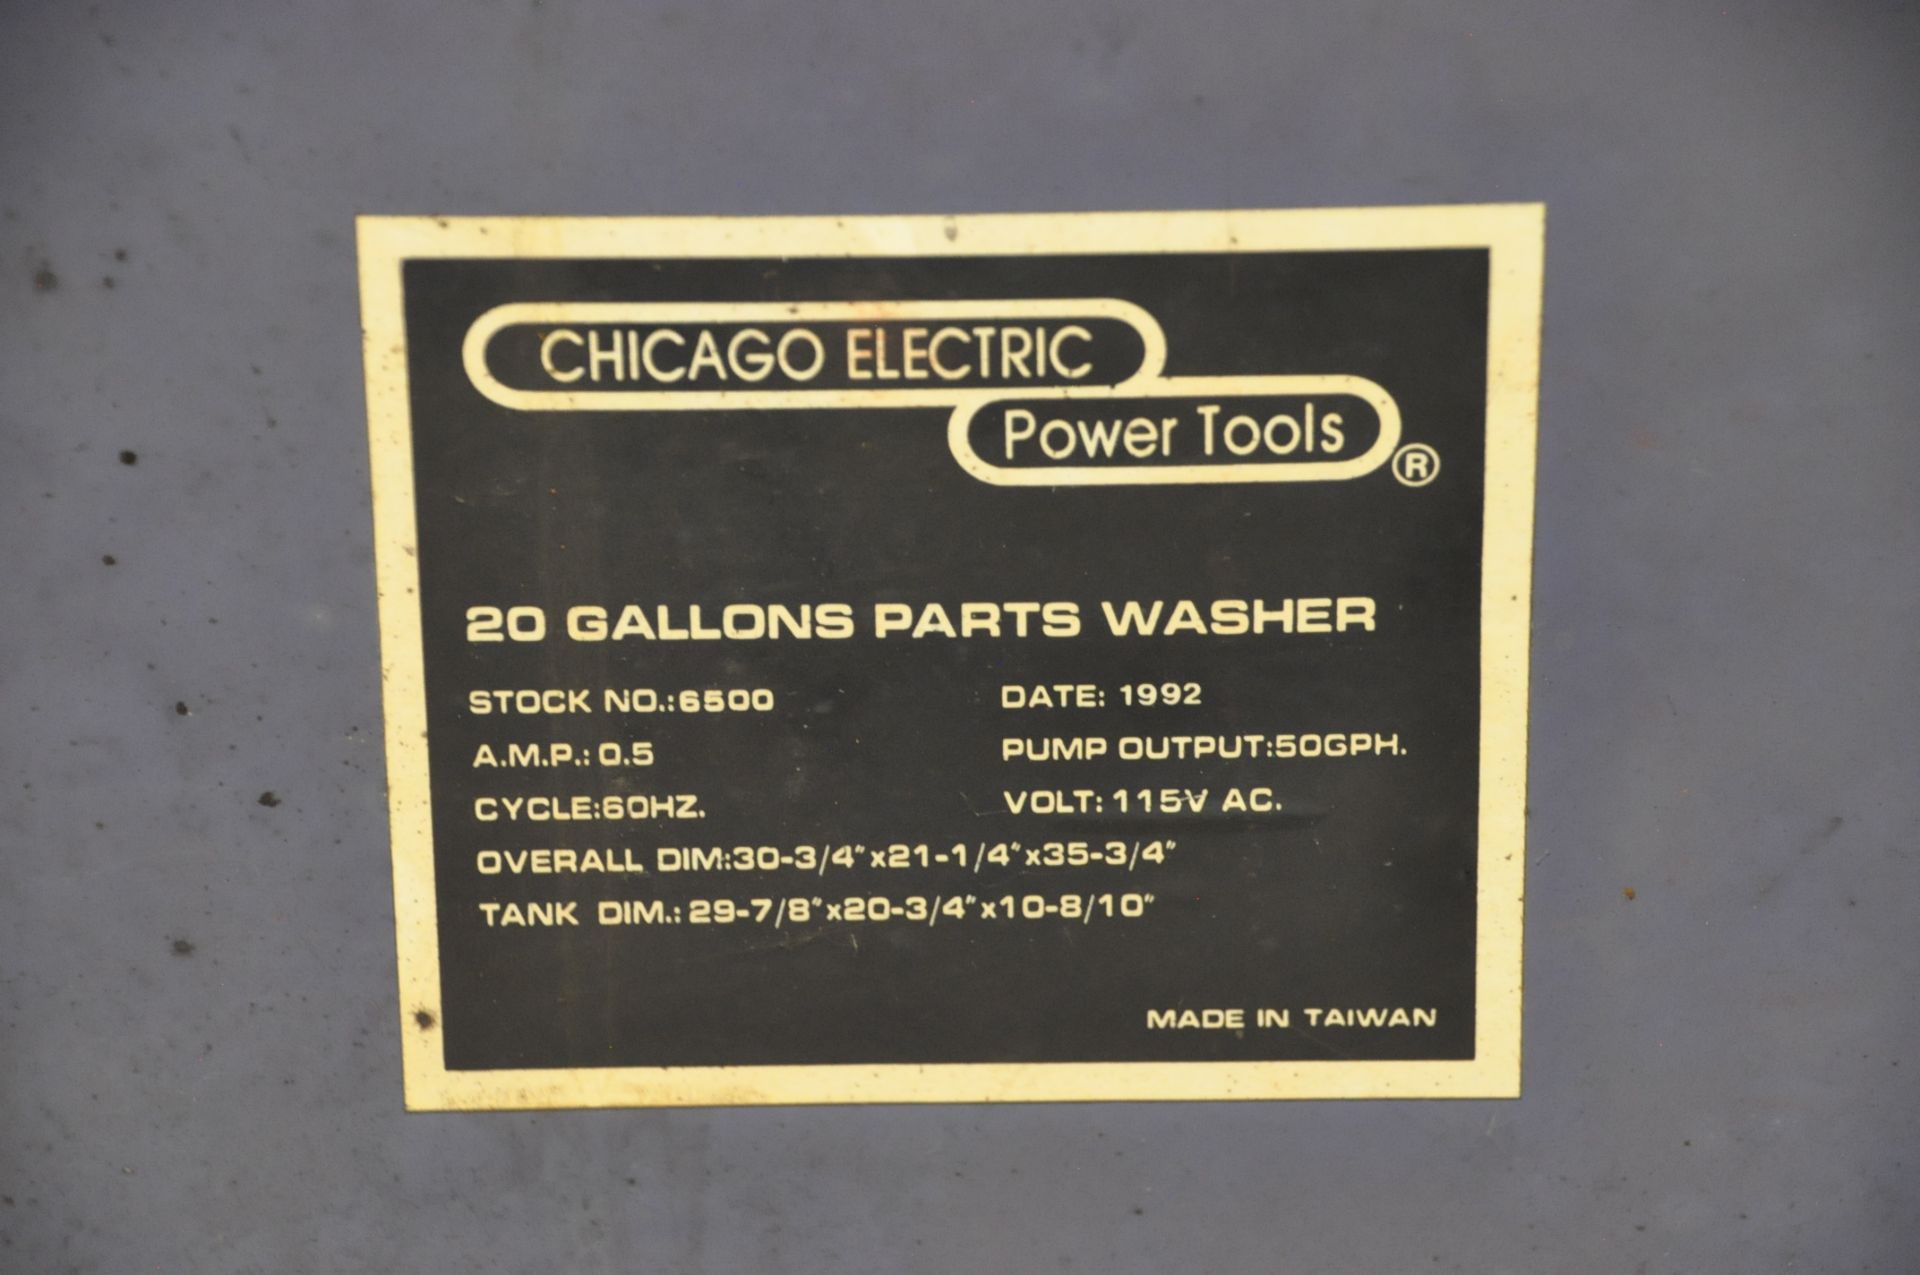 CHICAGO ELECTRIC Model 6500 20-Gallon Parts Washer (1992) - Image 2 of 2